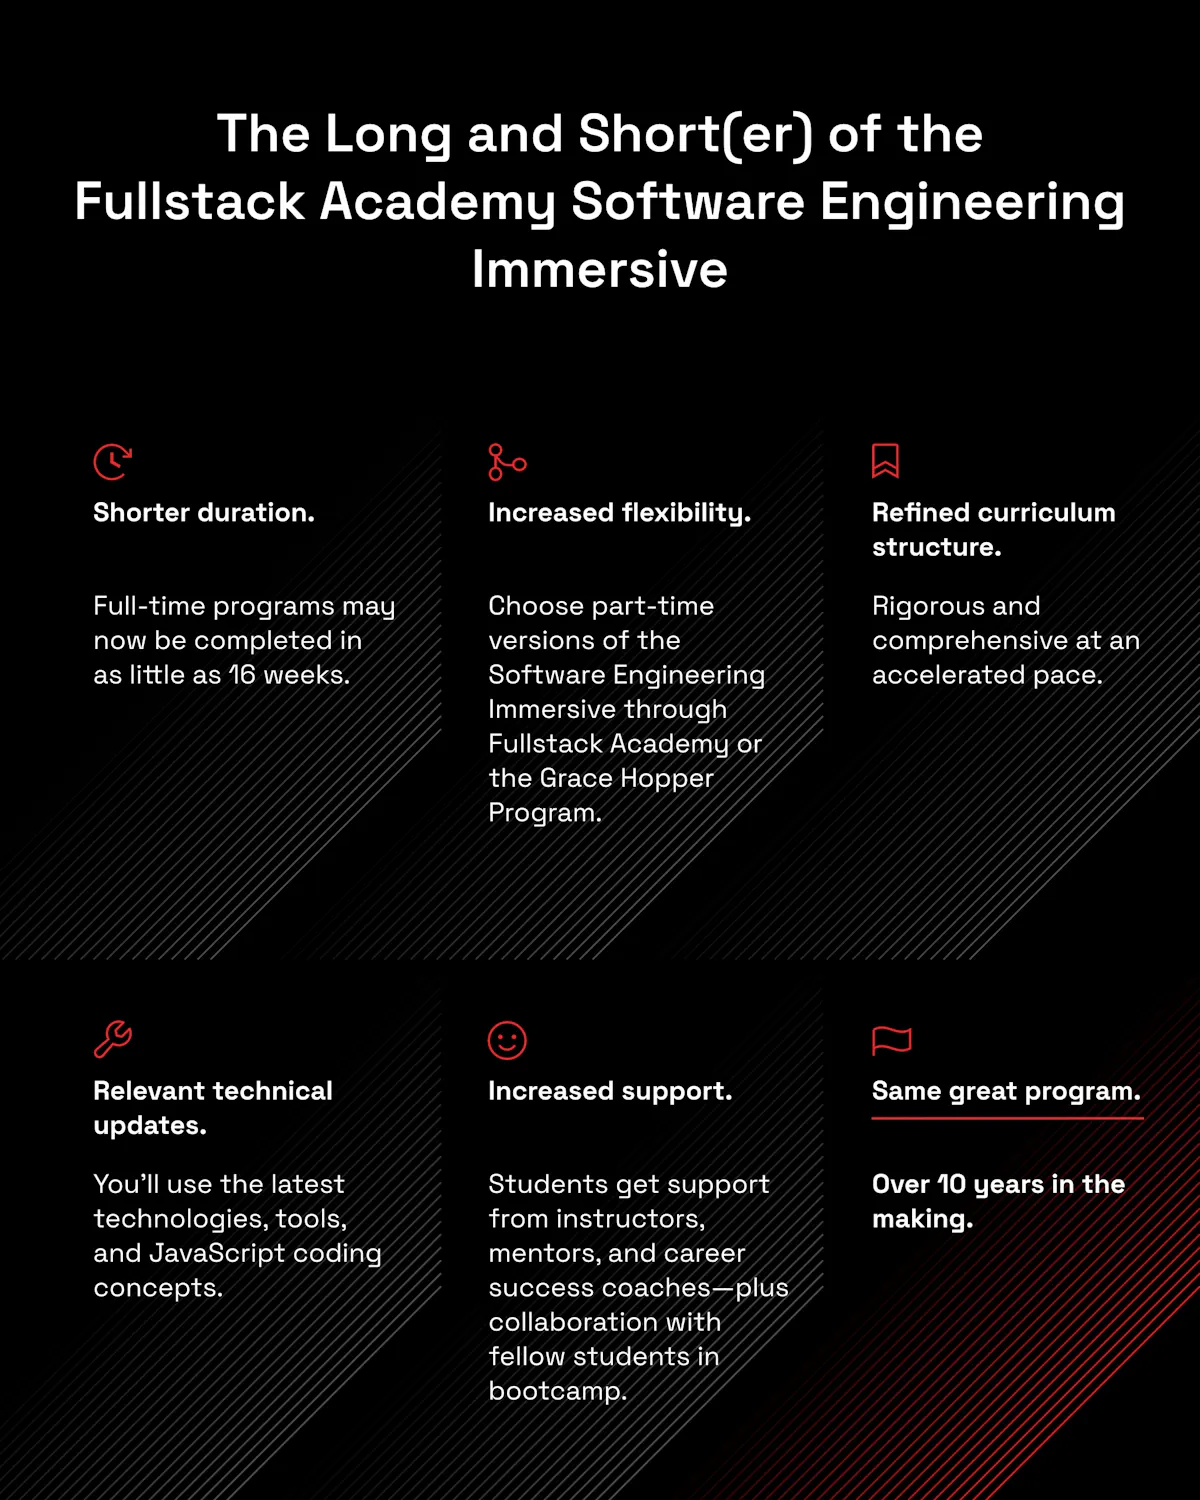 The Long and Short(er) of the Fullstack Academy Software Engineering Immersive